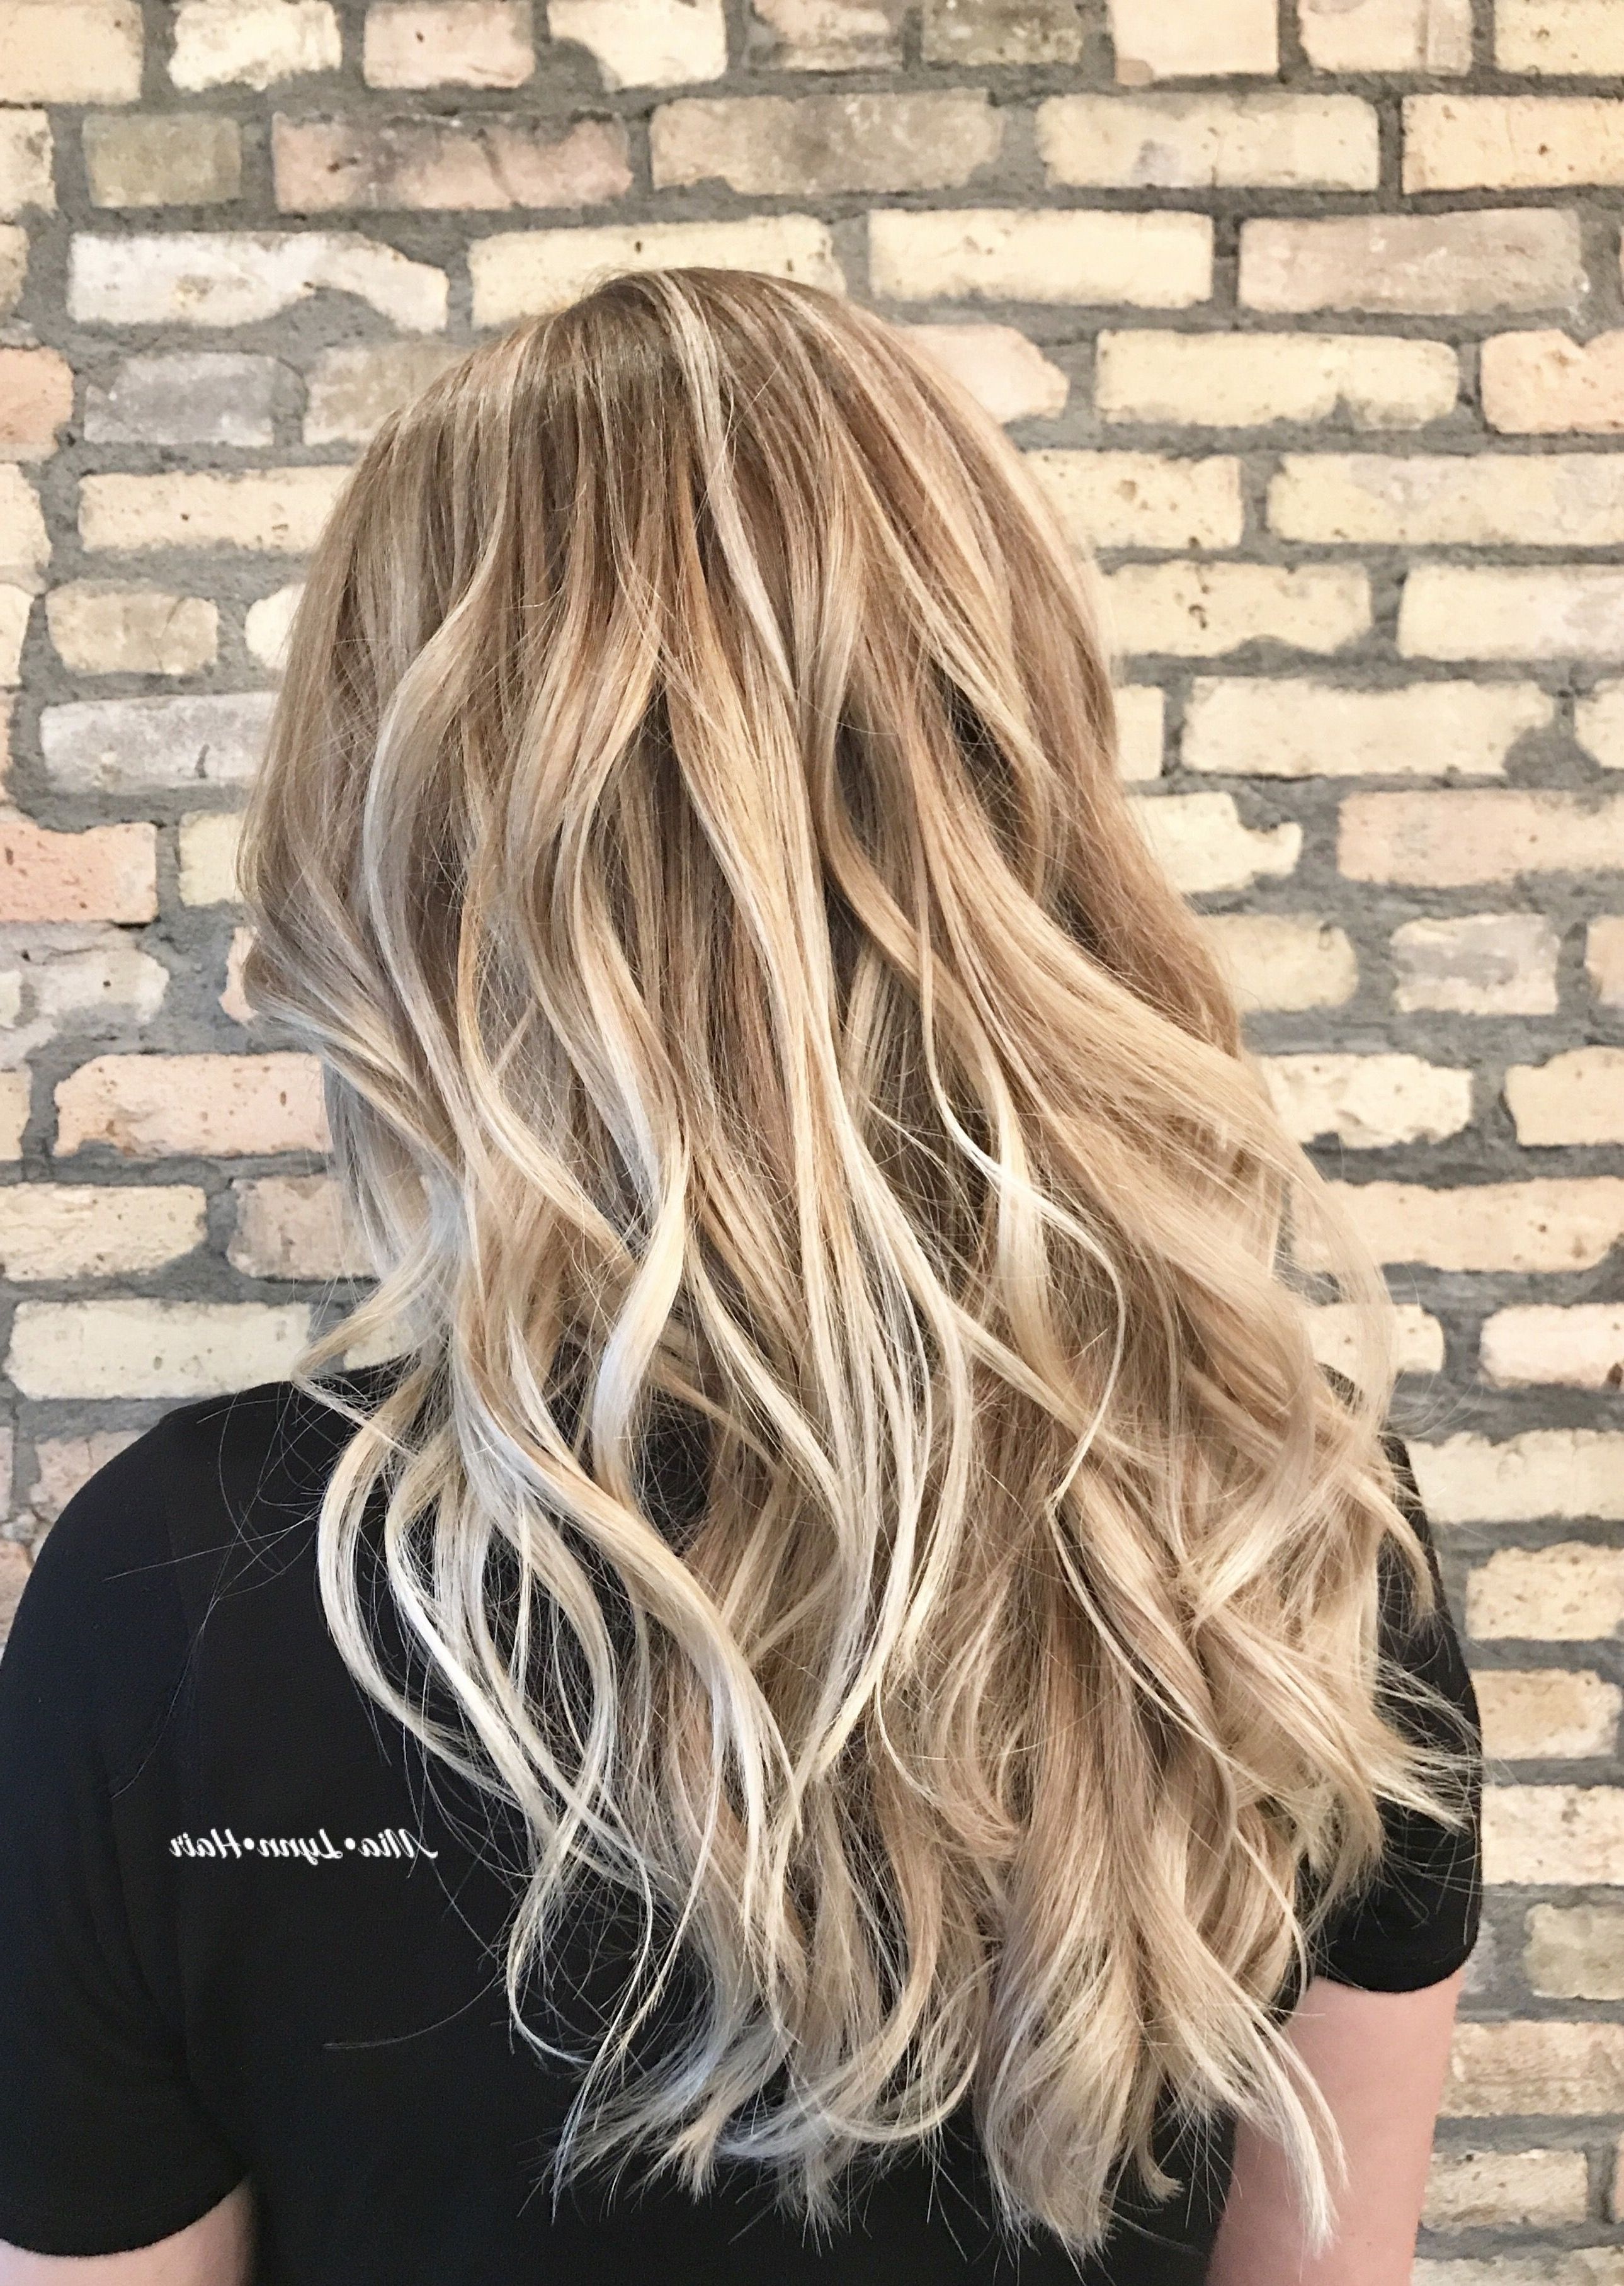 Recent Dishwater Blonde Hairstyles With Face Frame Within Blonde, Dimensional Blonde, Balayage, Blonde Balayage, Face Framing (View 3 of 20)